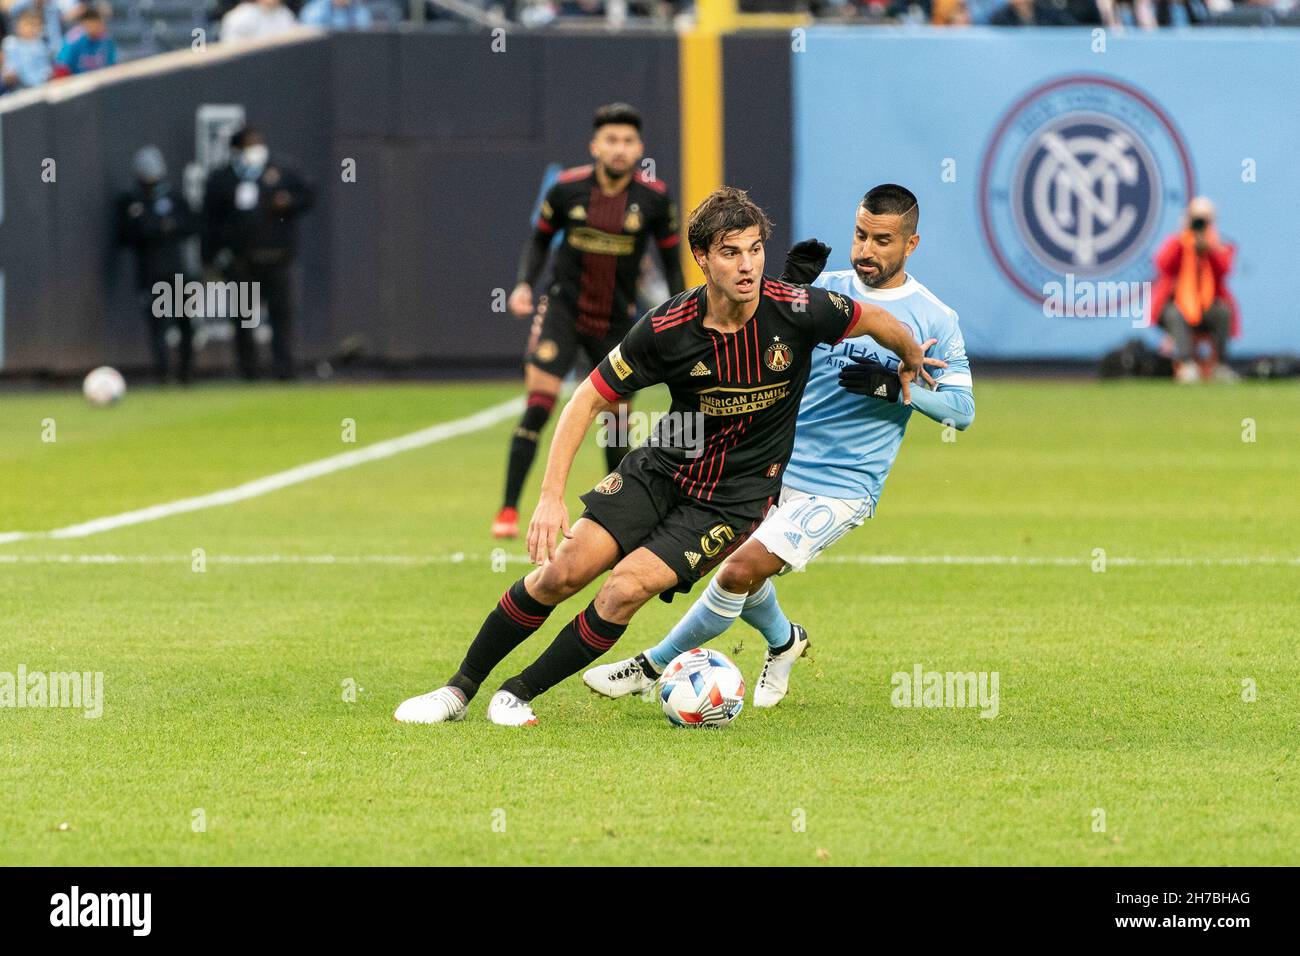 New York, USA. 21st Nov, 2021. Maximiliano Moralez (10) of NYCFC and Santiago Sosa (5) of Atlanta United fight for the ball during first round game of MLS Cup on Yankee stadium. NYCFC won 2 - 0 and progressed to semifinal of MLS Cup. They will play New England Revolution for the place in Eastern Conference final. Credit: Sipa USA/Alamy Live News Stock Photo